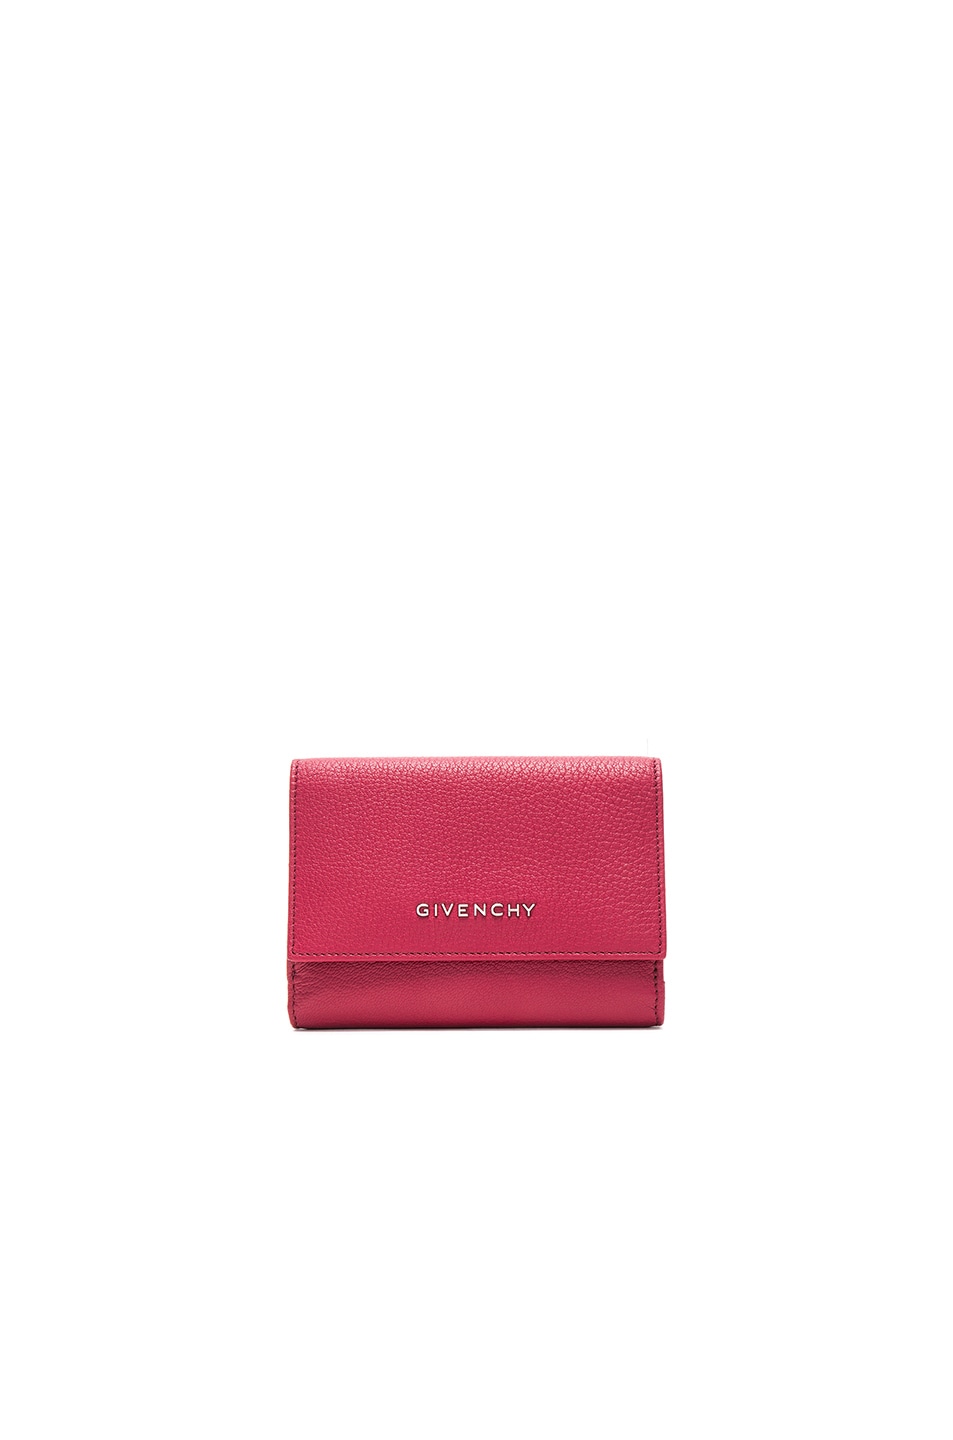 Image 1 of Givenchy Compact Wallet in Raspberry